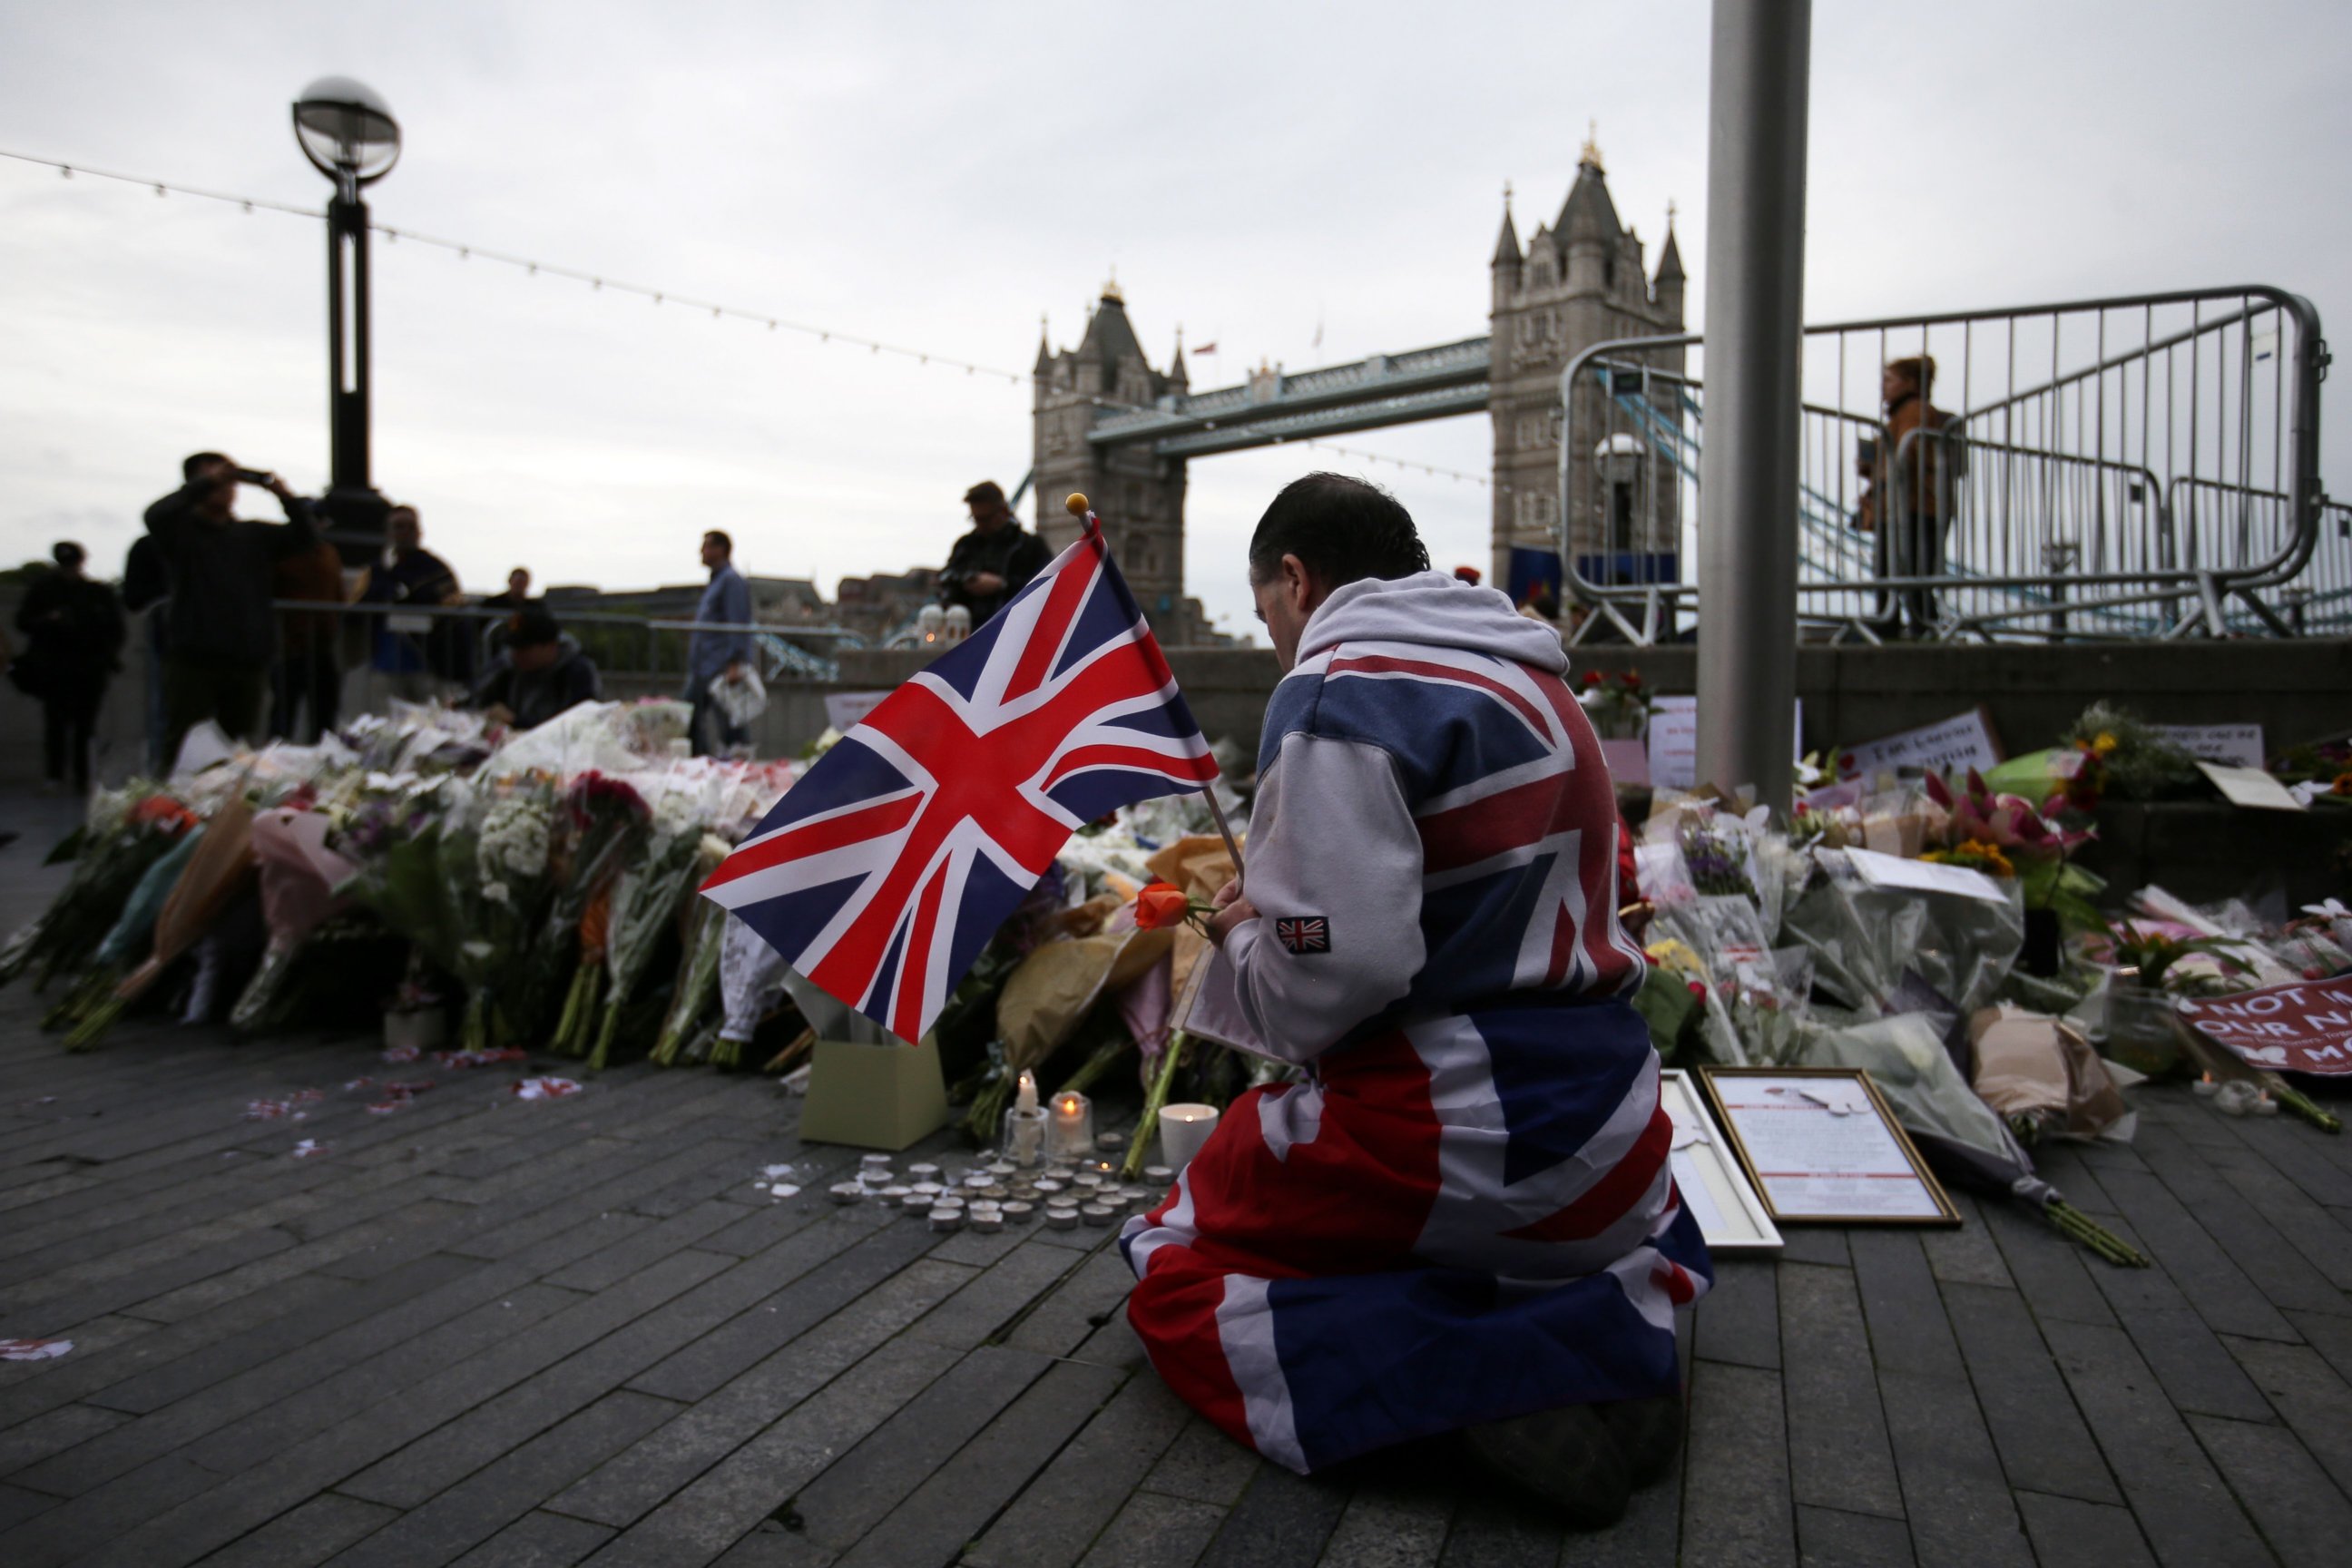 PHOTO: A man holds a Union flag as he kneels near flowers laid at Potters Fields Park in London, June 5, 2017, during a vigil to commemorate the victims of the terror attack on London Bridge.